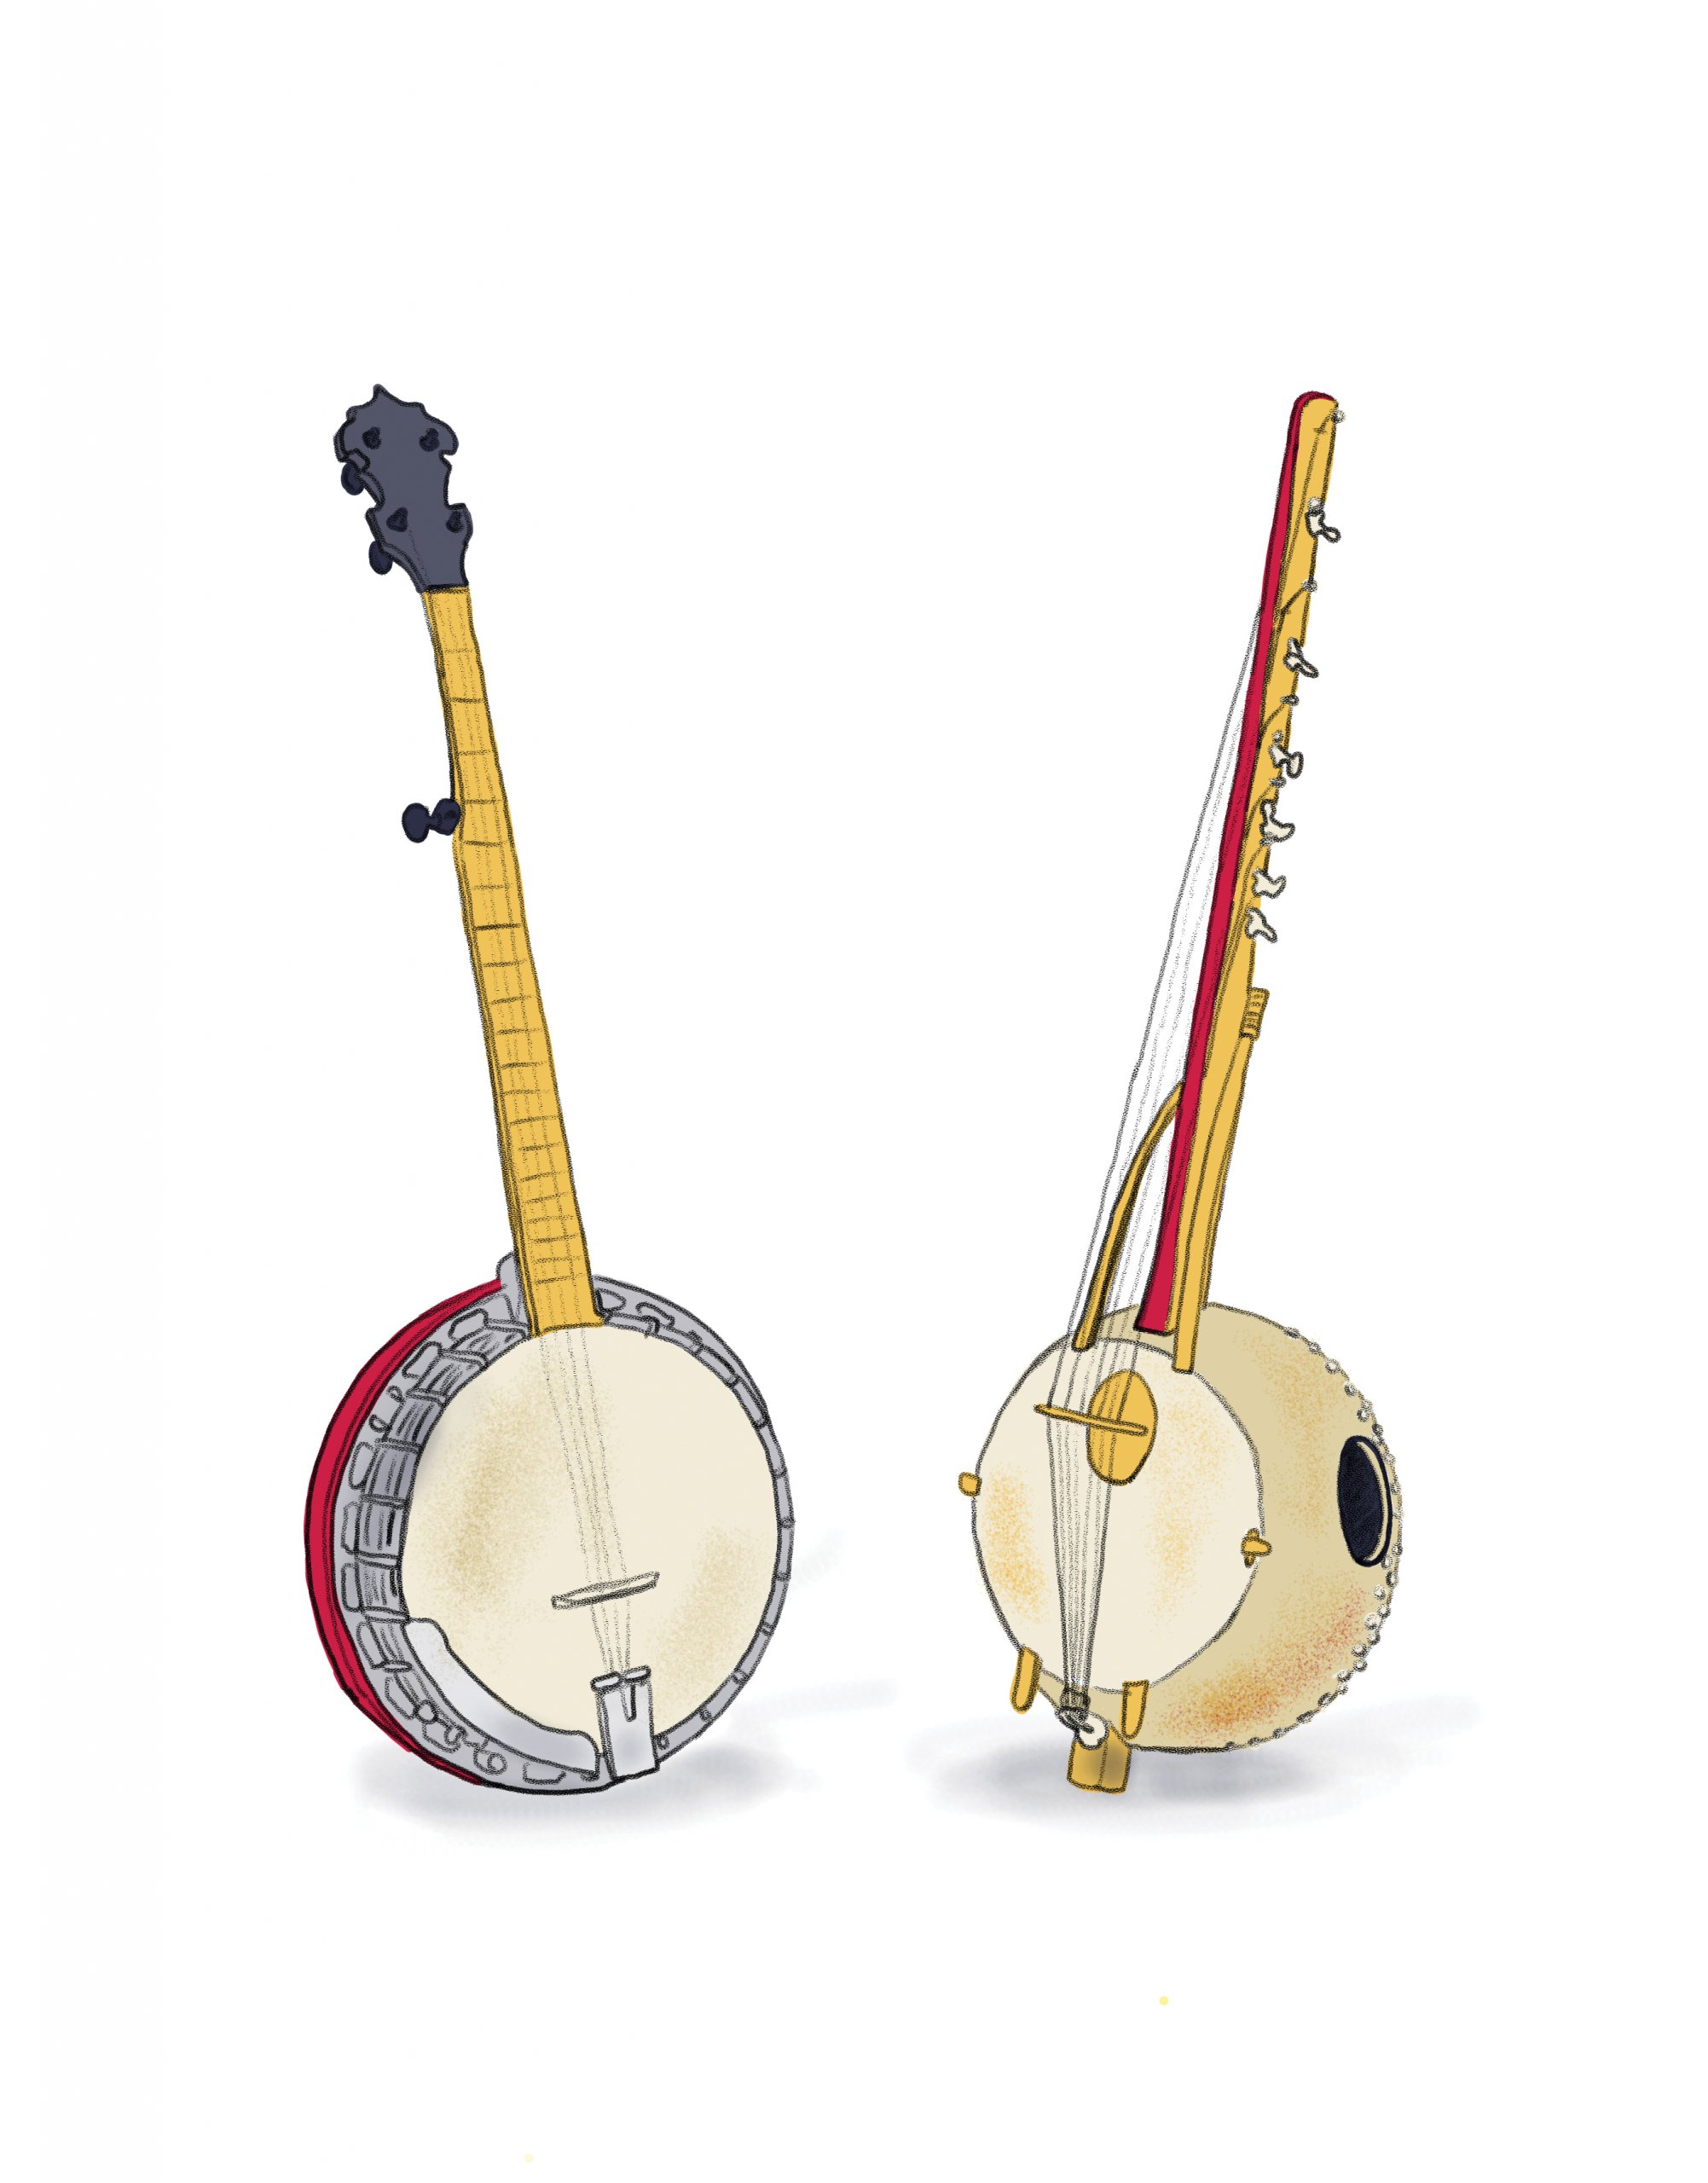 Illustration of a banjo and the African instrument, the ngoni